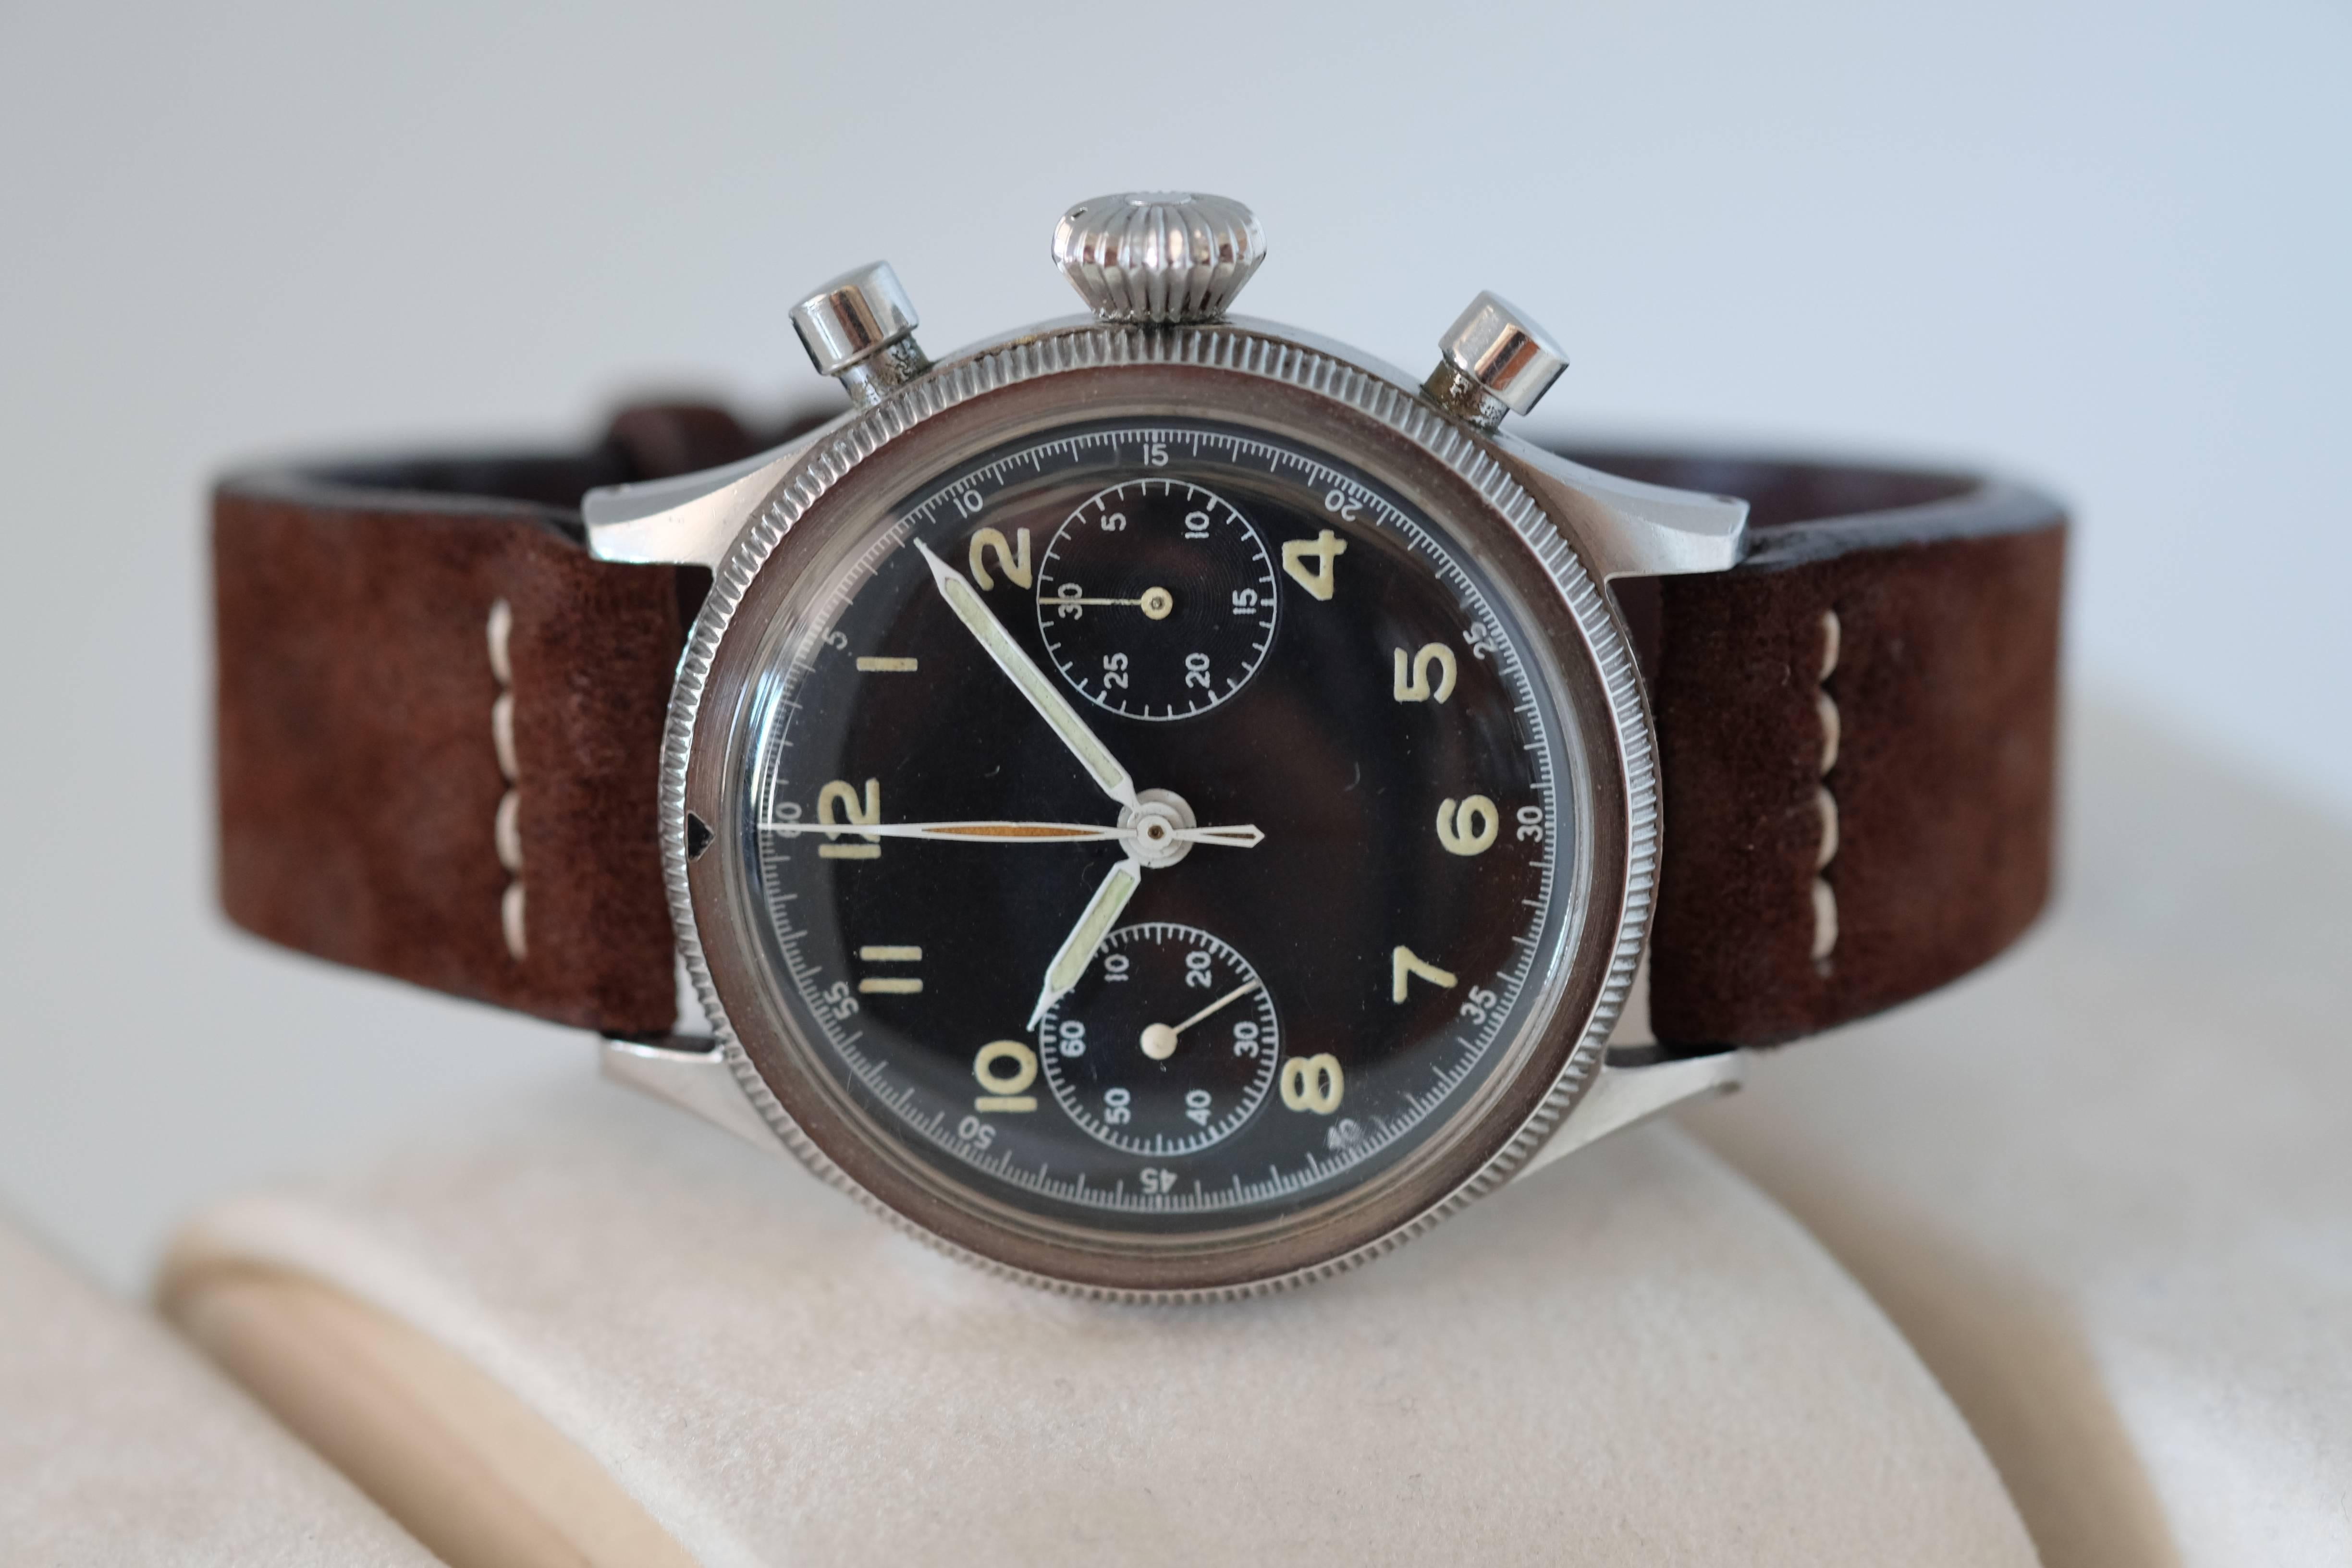 Breguet. A Rare and Early Stainless Steel Chronograph Wristwatch Issued by the French Military

Model: Type 20

Circa: 1956

Valjoux Cal. 222 mechanical movement, 17 jewels, black matte dial, luminous Arabic numerals, outer minute divisions